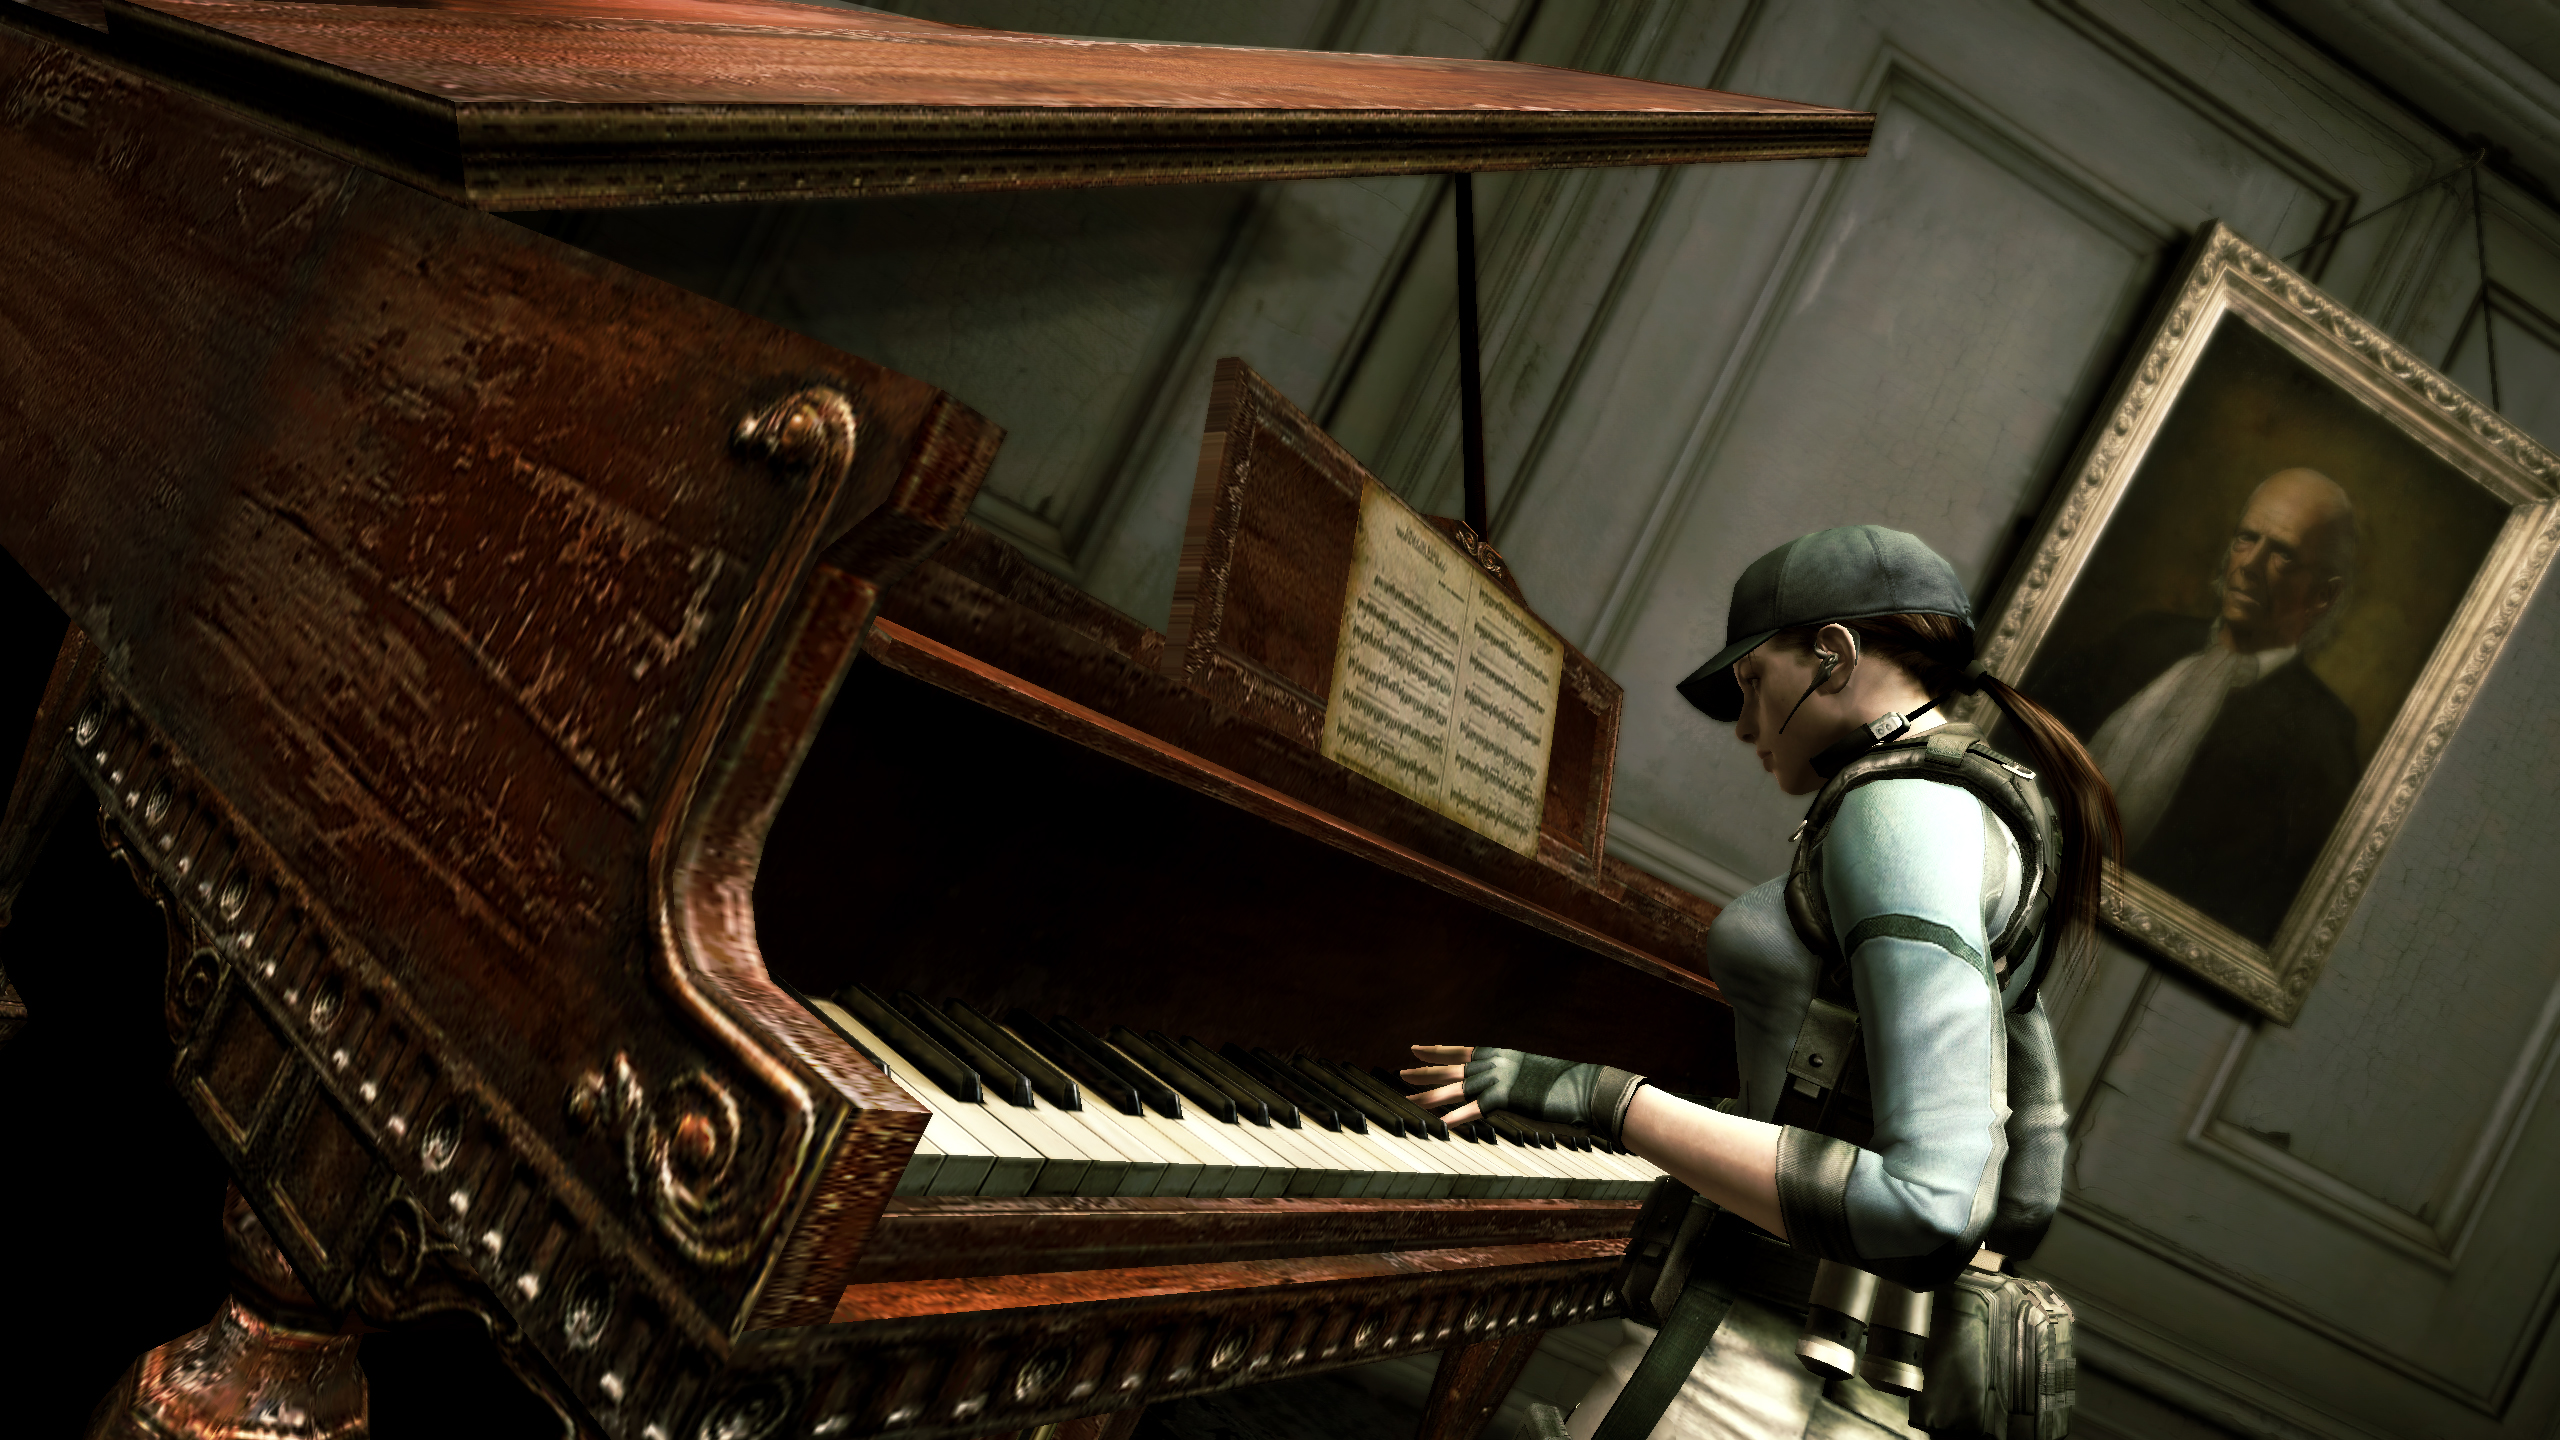 Music is games. Resident Evil пианино. Resident Evil 1 пианино. Resident Evil 5. Resident Evil Village пианино.